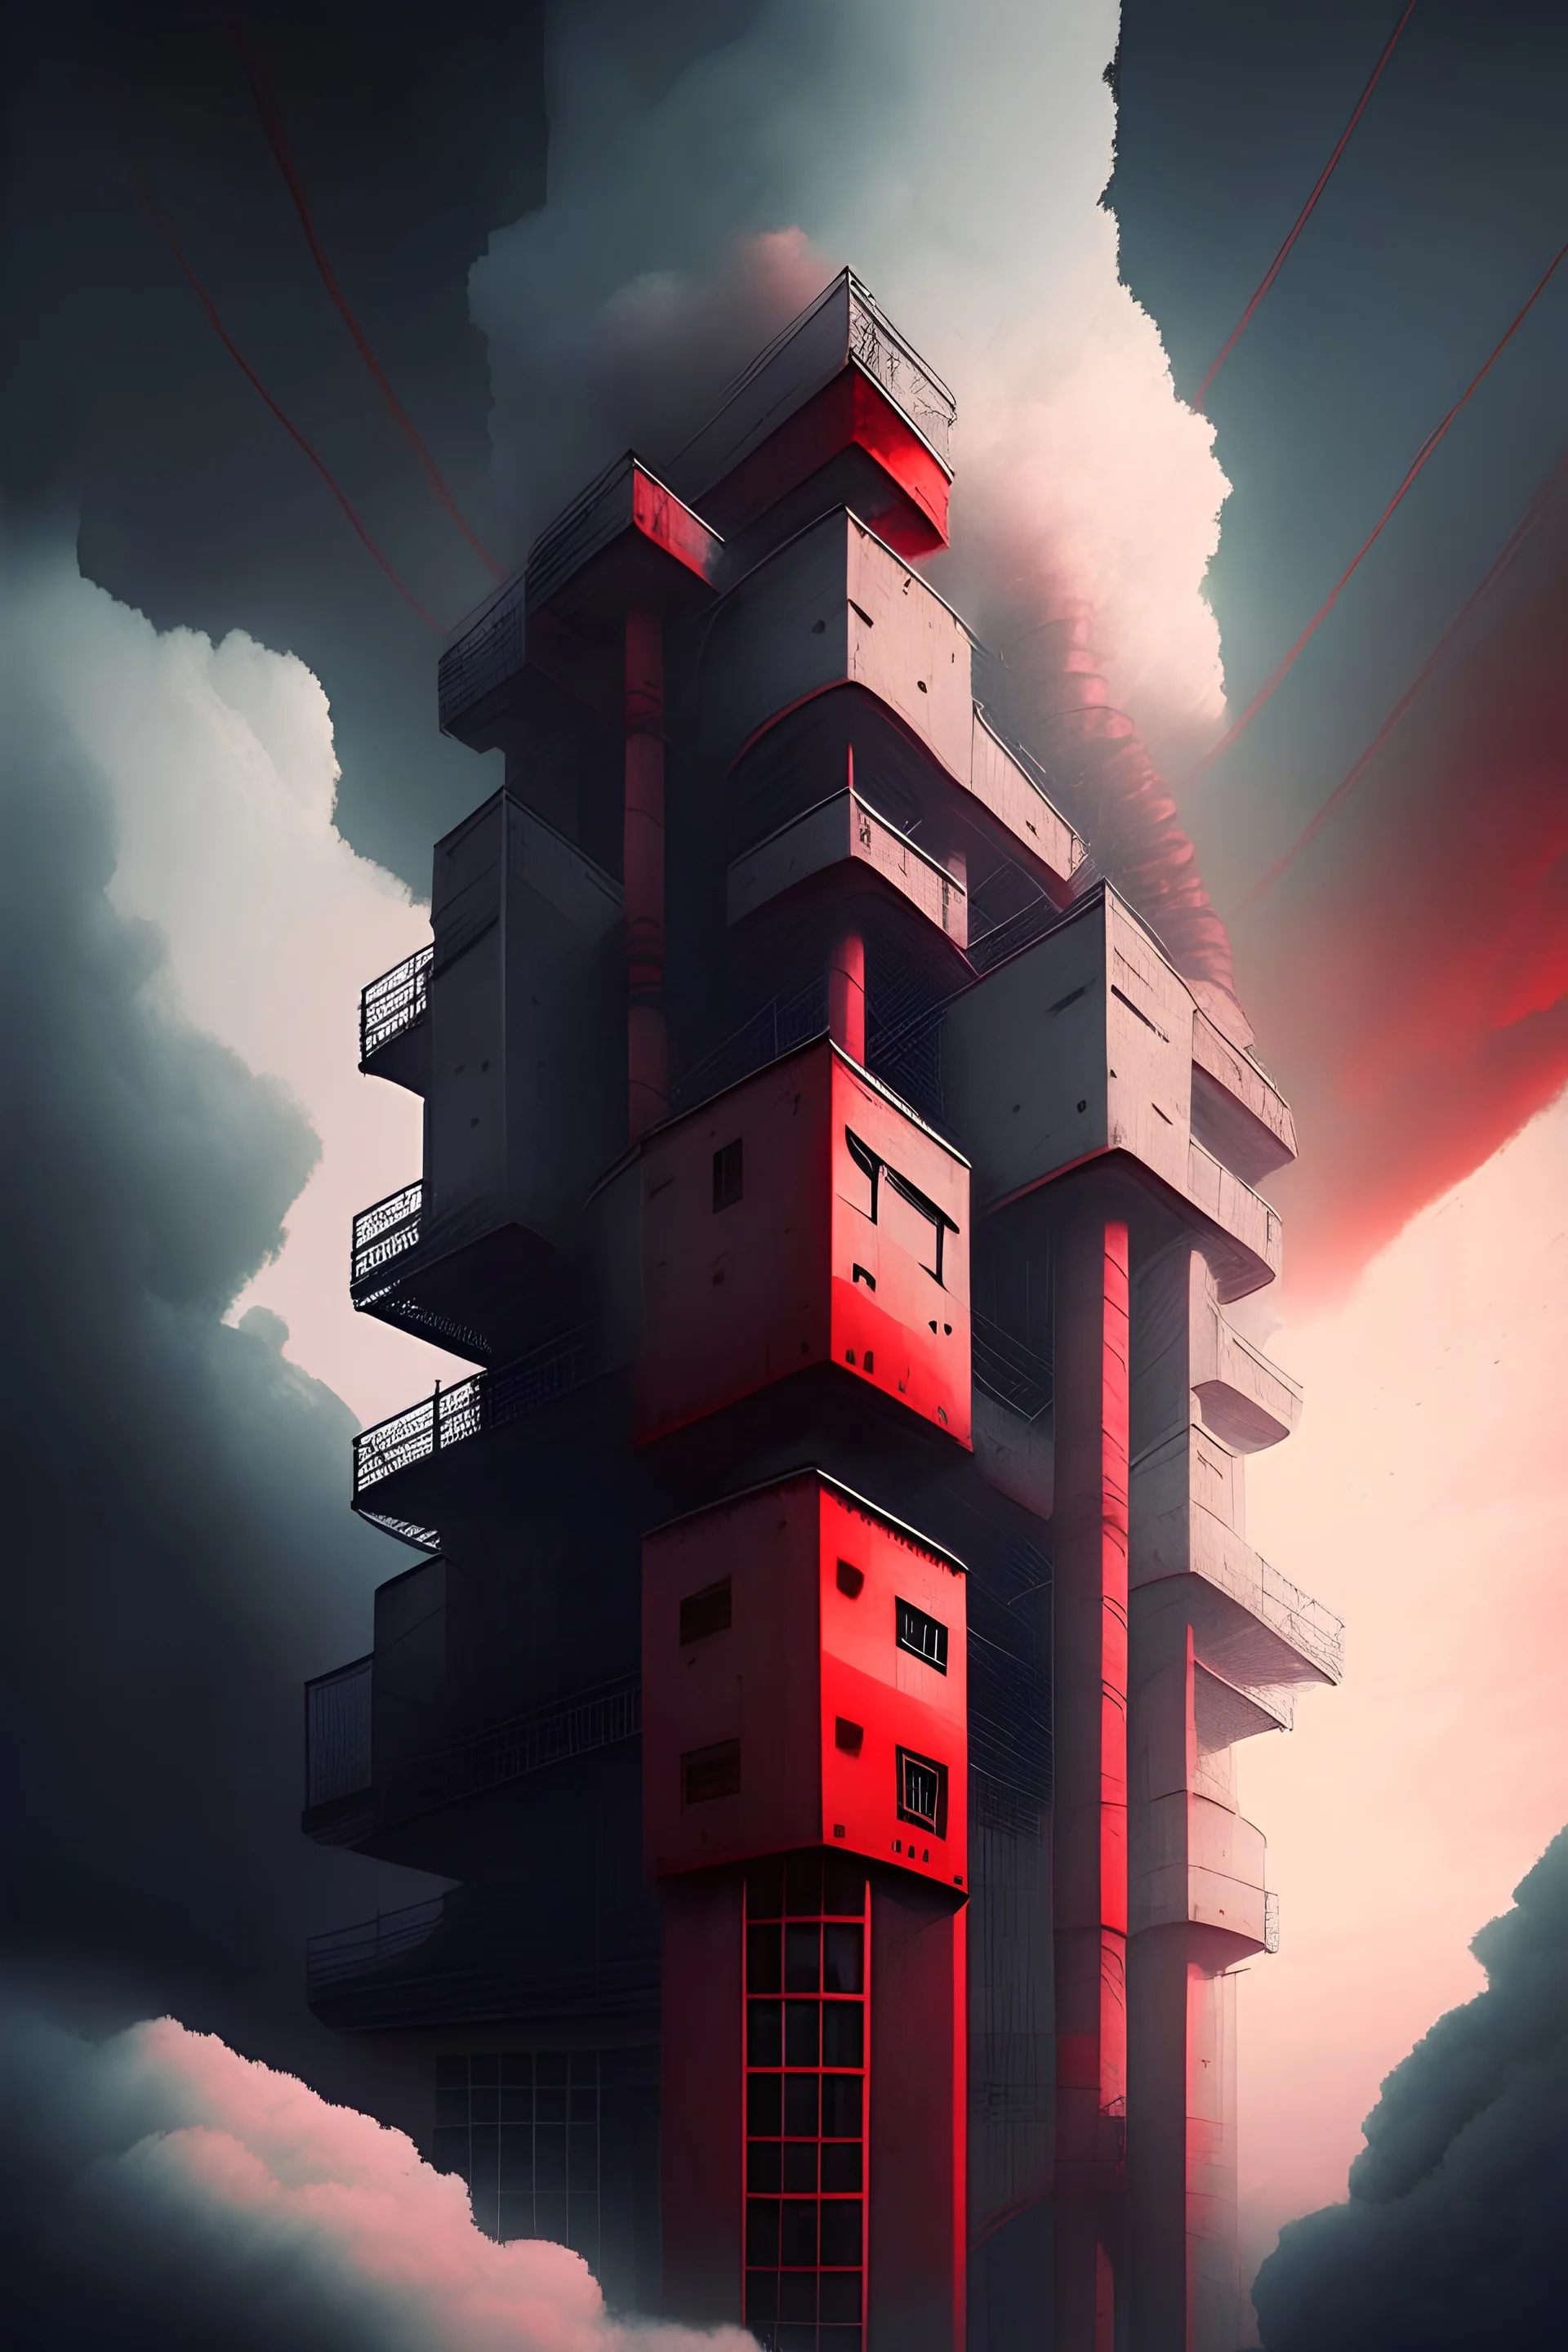 immense gray and red superstructure filling all the sky. windows, inverted staircases and pipes going out and everywhere. early sunlight in the clouds